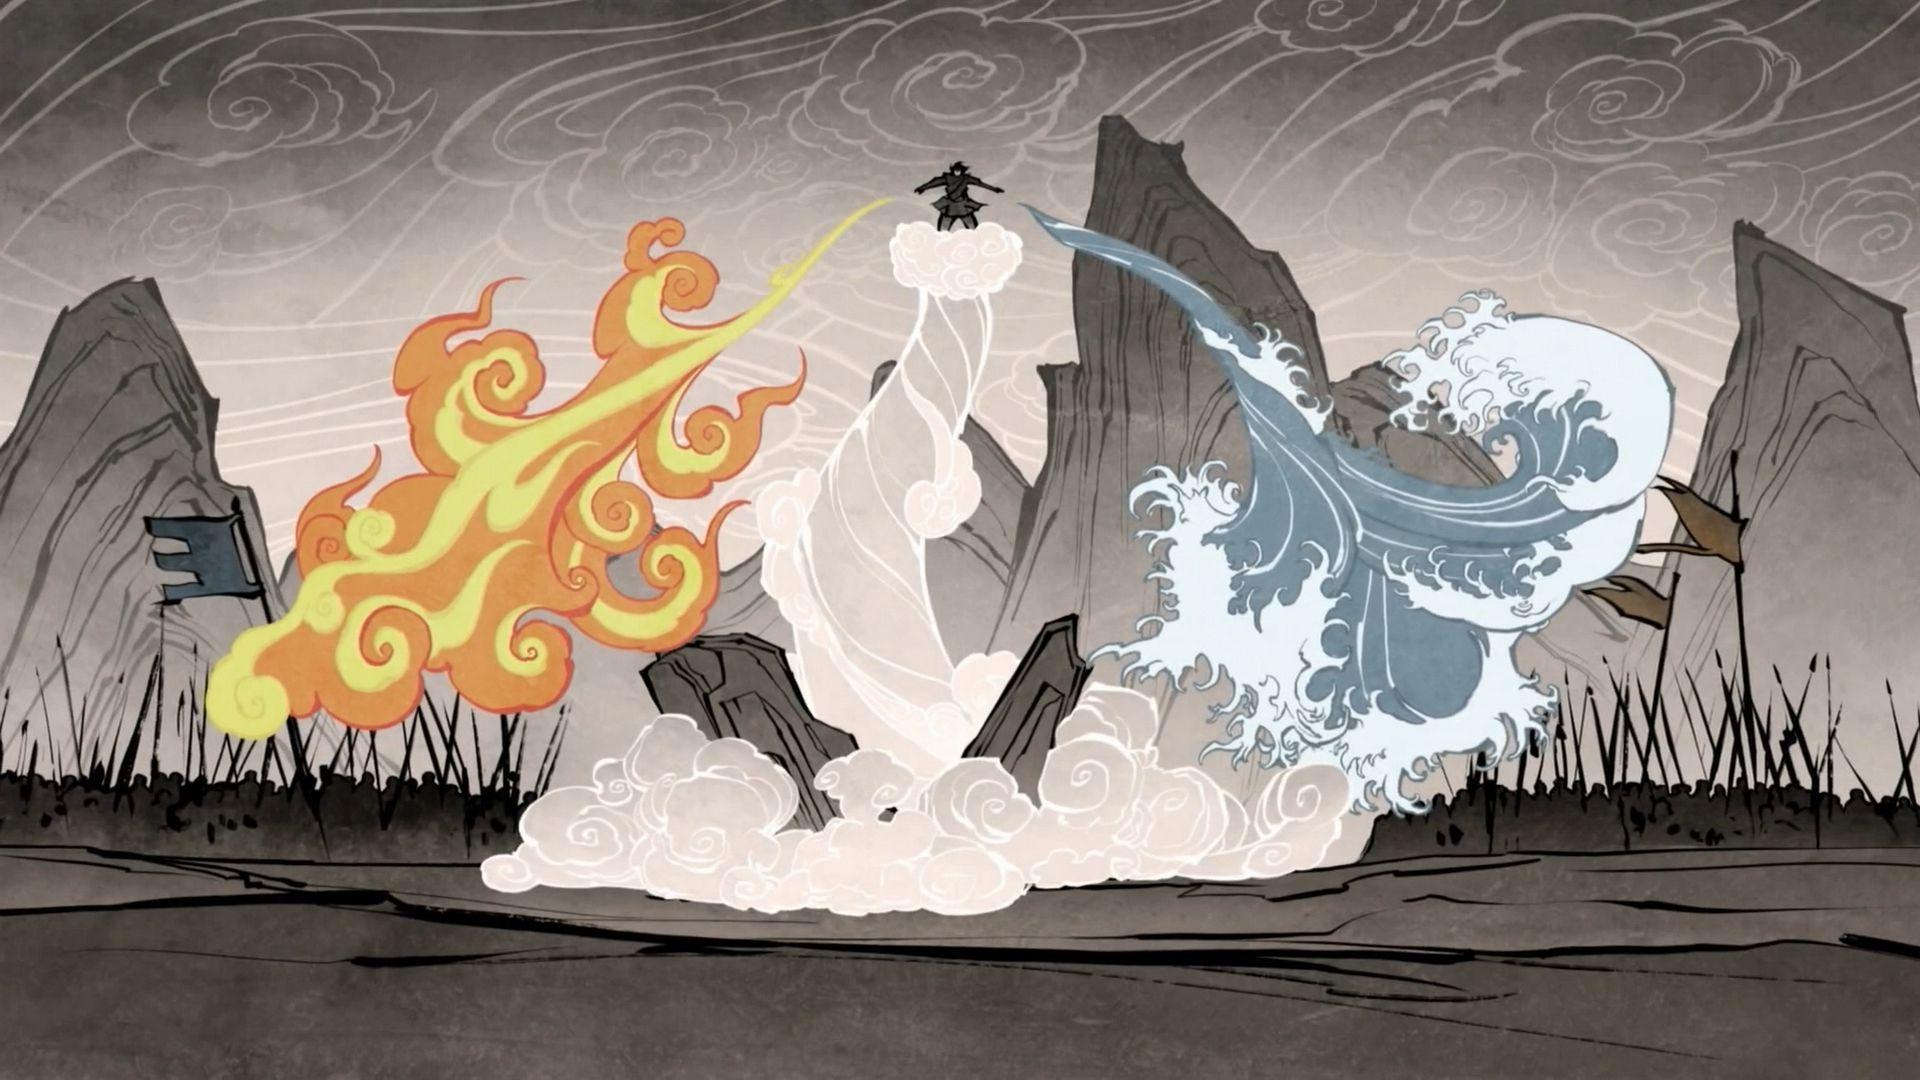 Avatar The Last Airbender Wallpaper High Quality. Download